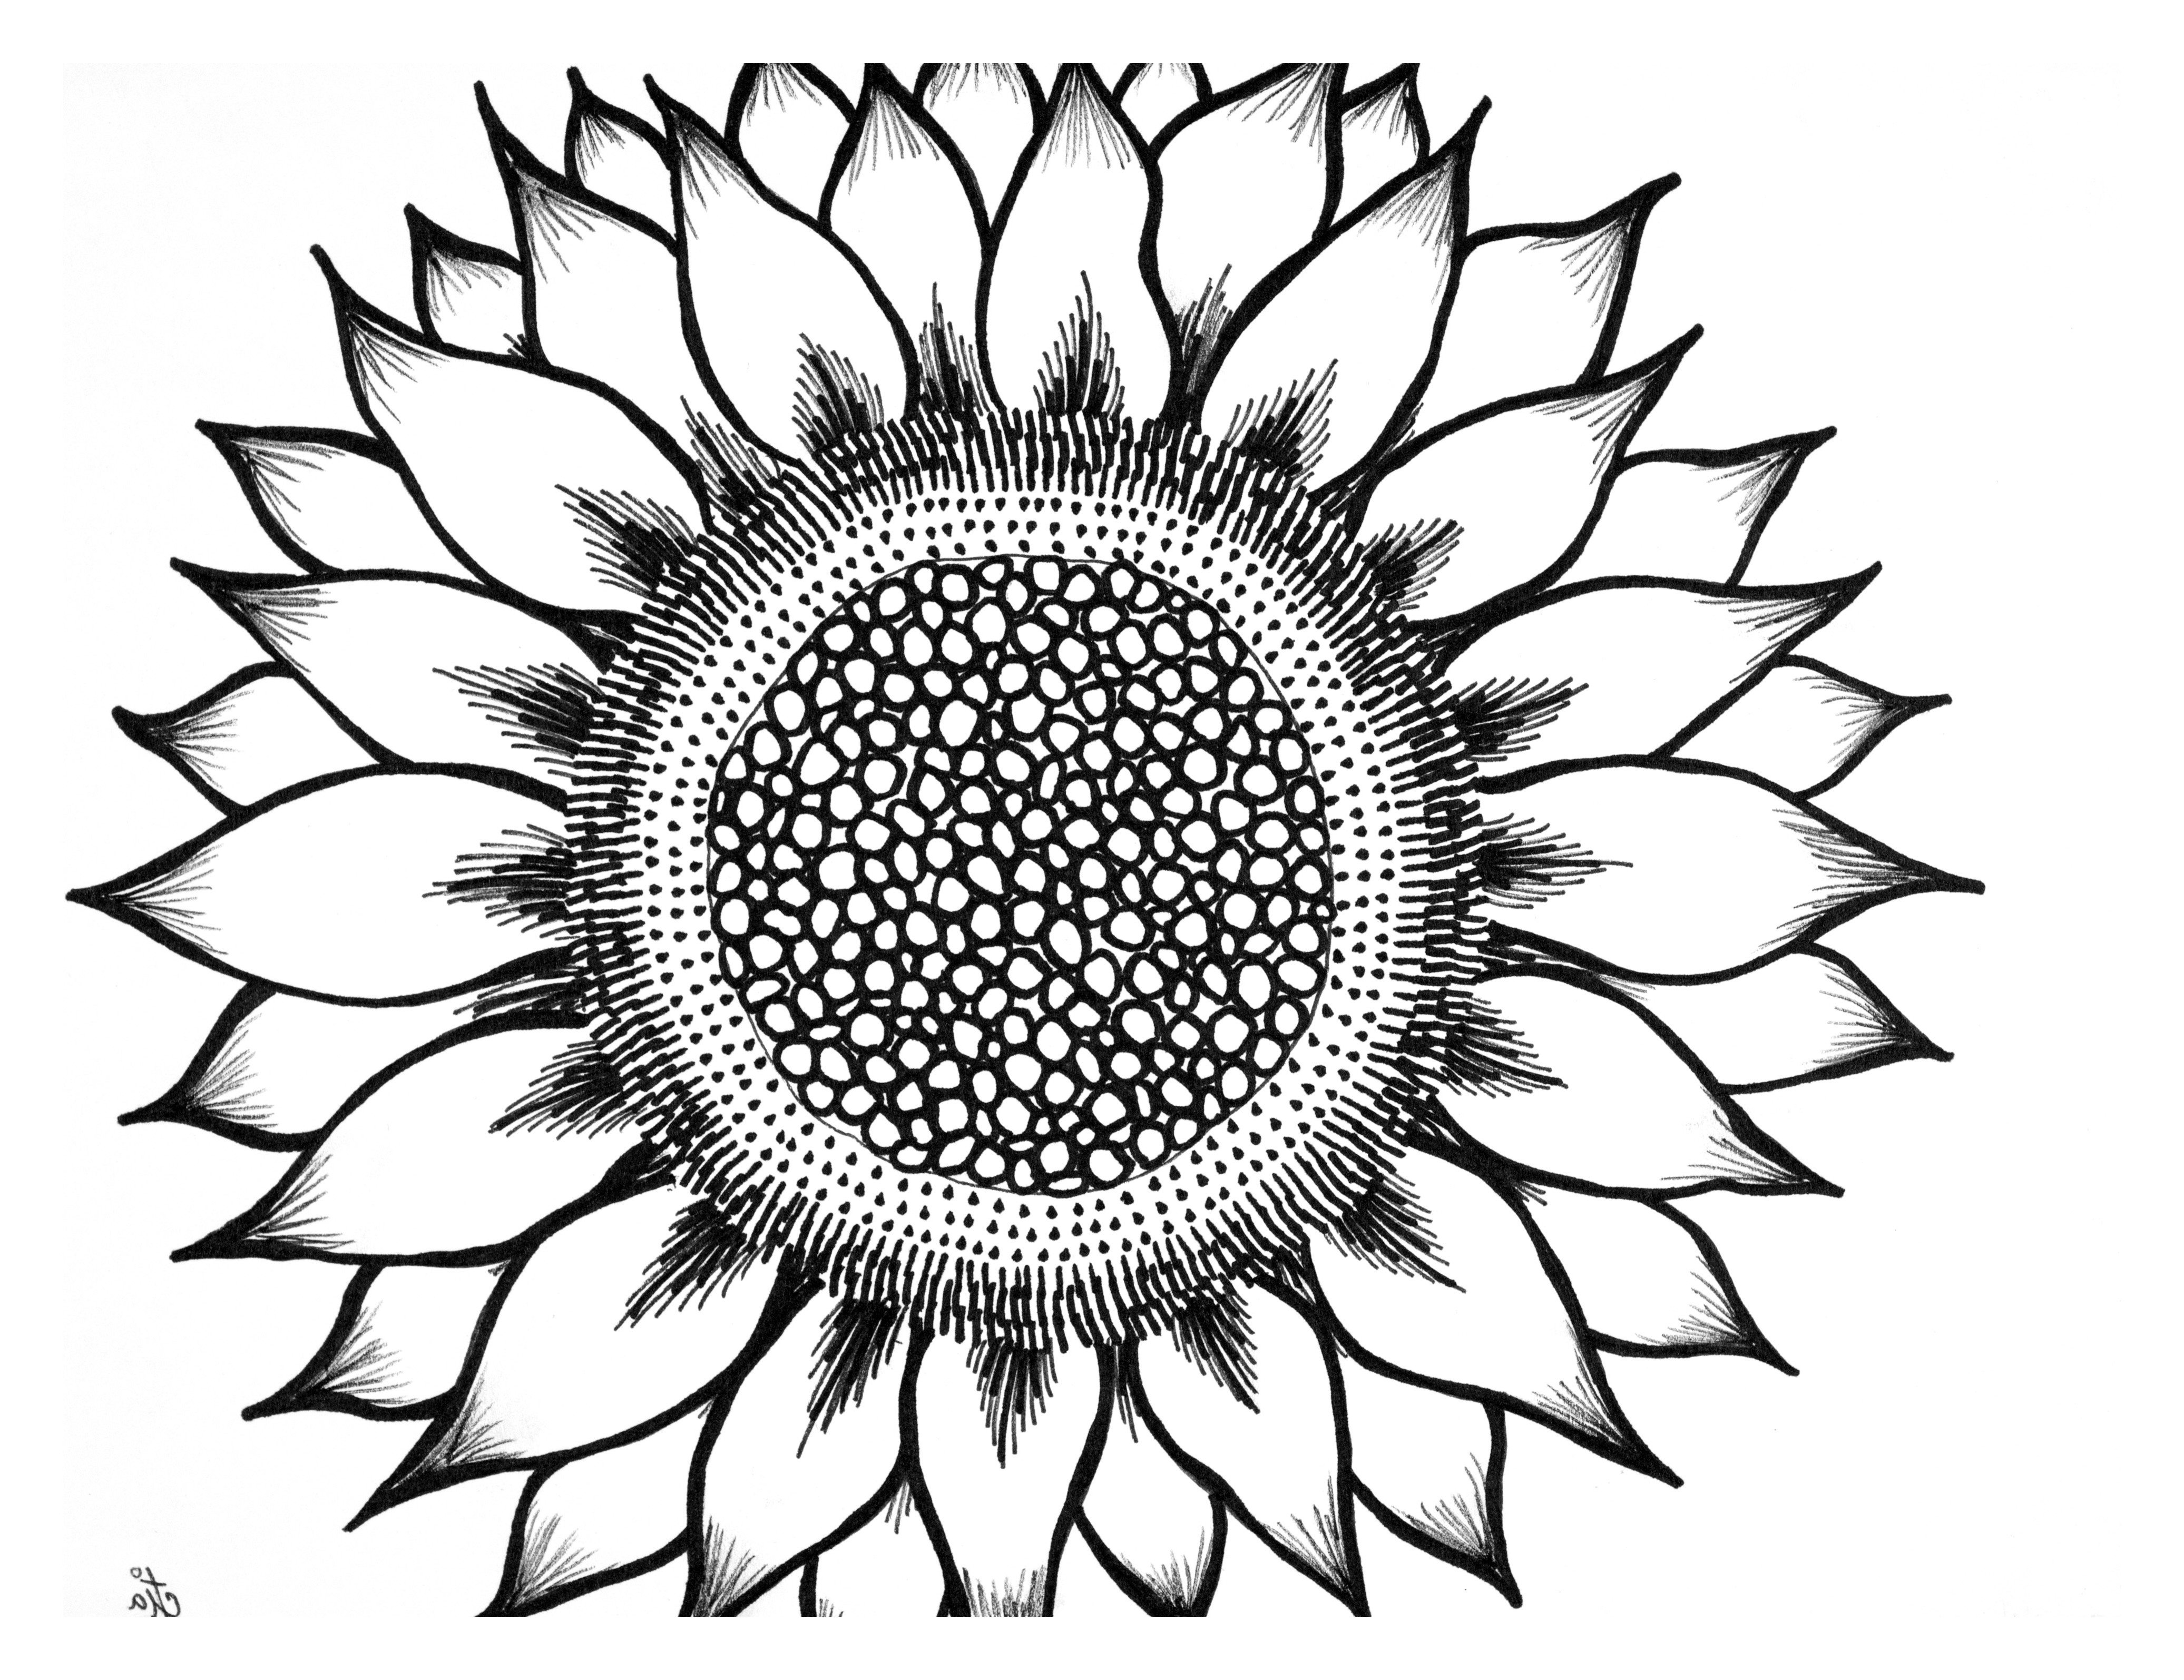 Sunflower black and white black and white sunflower drawing